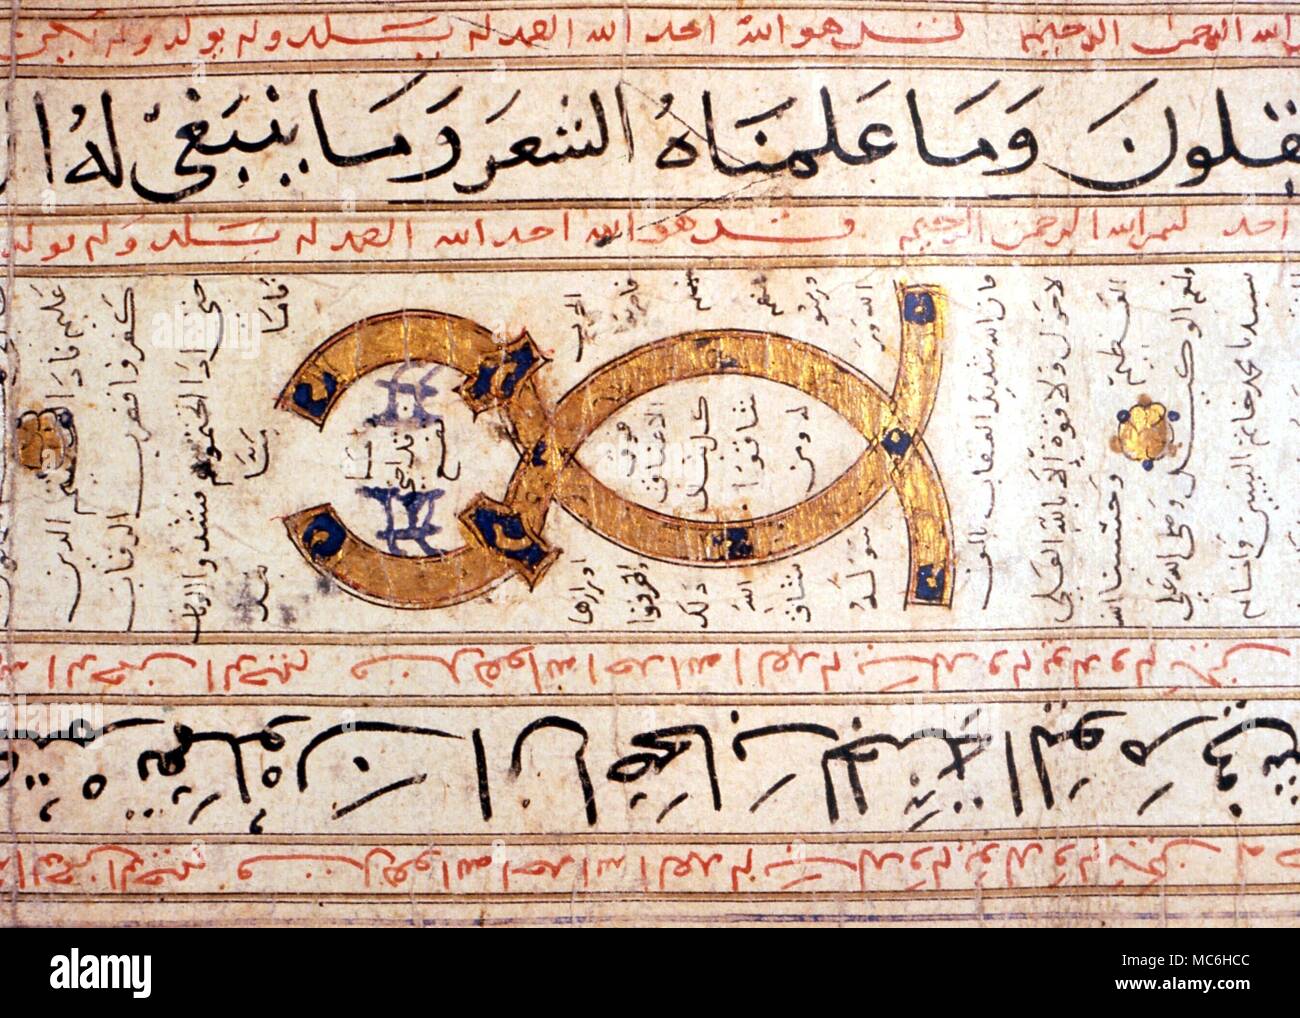 AMULETS - Magical symbol on an Arabic scroll which is a recipe used as a dispenser of magical amulets and charms against evil. Egyptian, 14th century. Dar al-Athar al-Islamiyyah, Kuwait Stock Photo